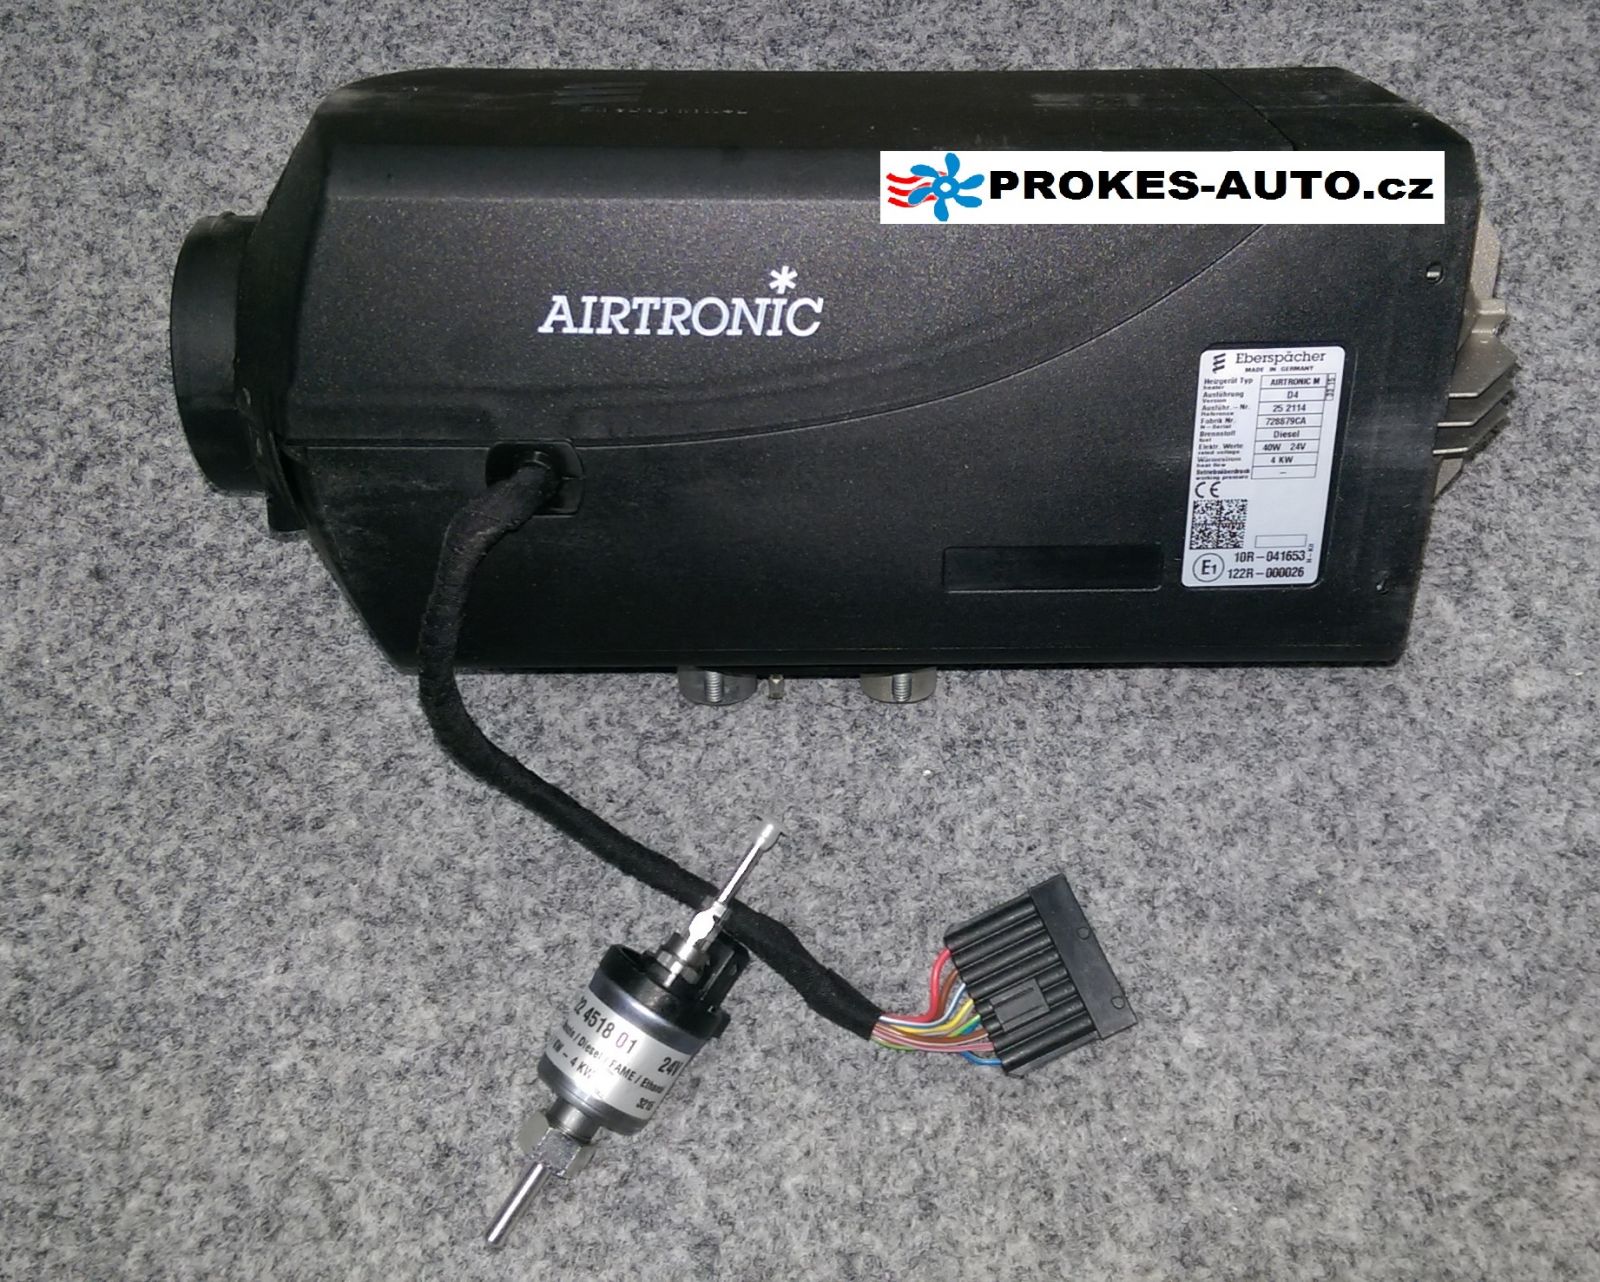 Eberspächer Airtronic M3 Commercial Standheizung, 4 kW bei Camping Wagner  Campingzubehör